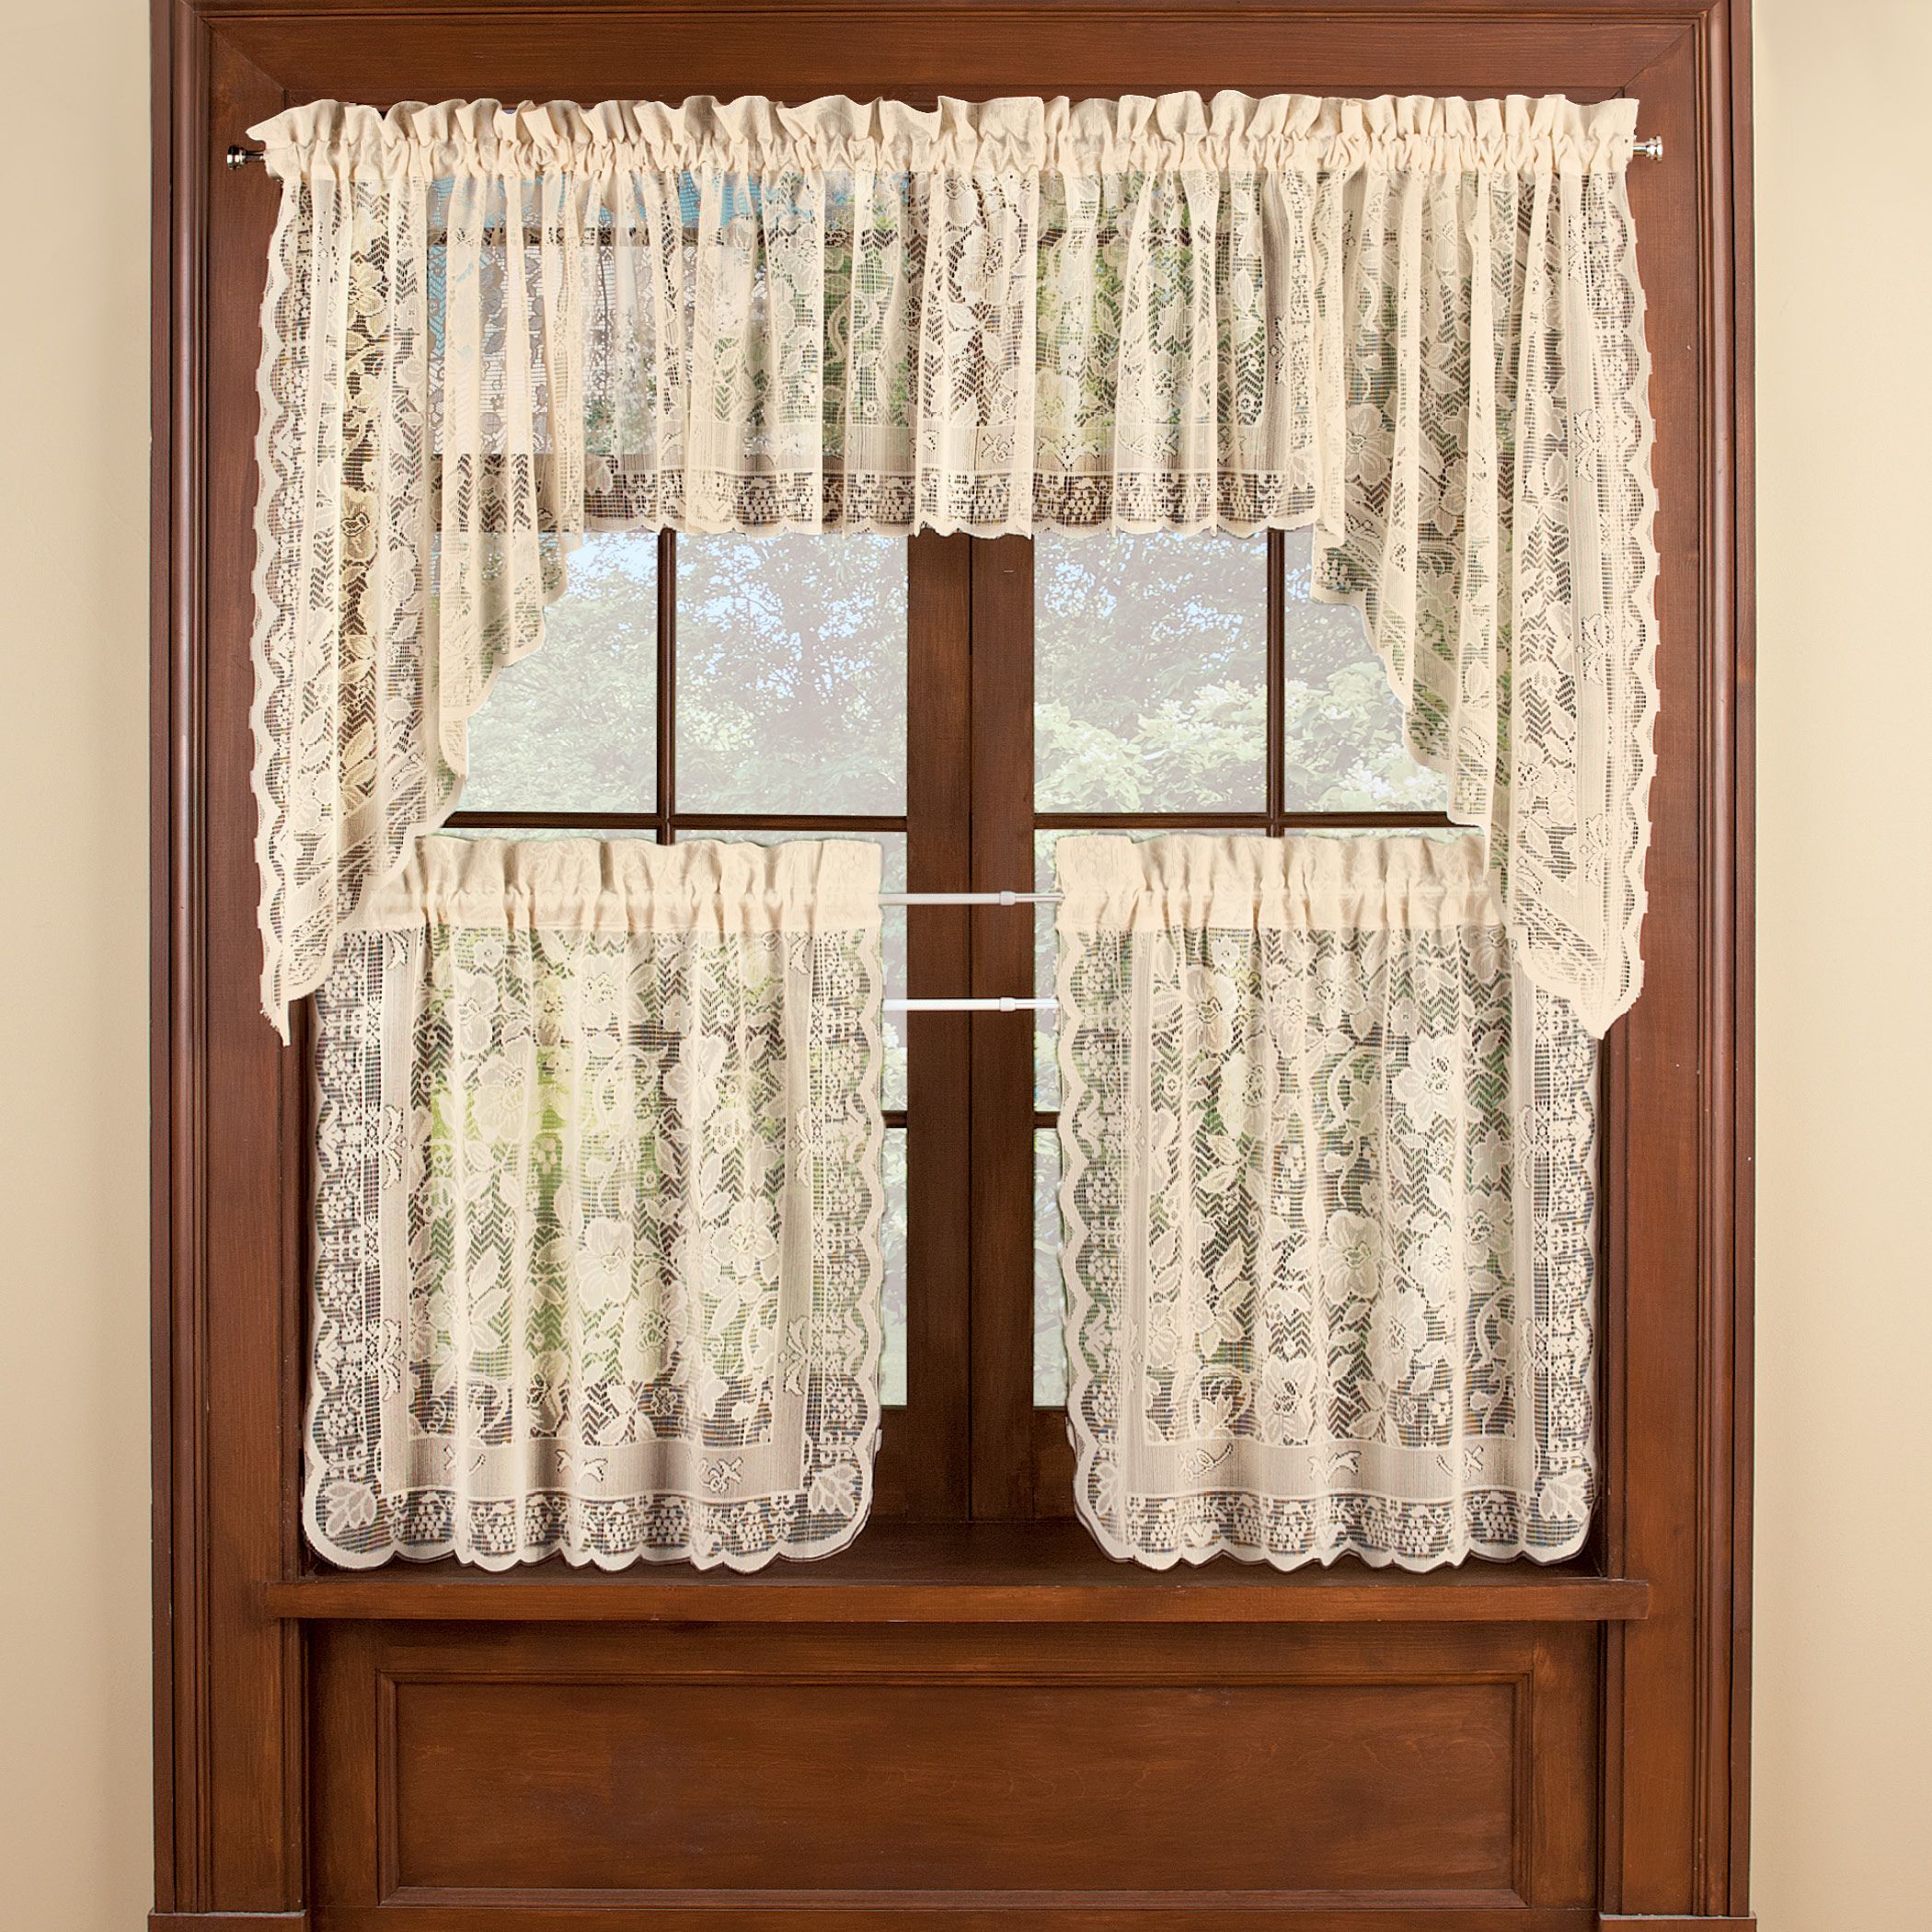 Windsor Lace Cafe Curtain Tier Set With Regard To Floral Lace Rod Pocket Kitchen Curtain Valance And Tiers Sets (View 10 of 20)